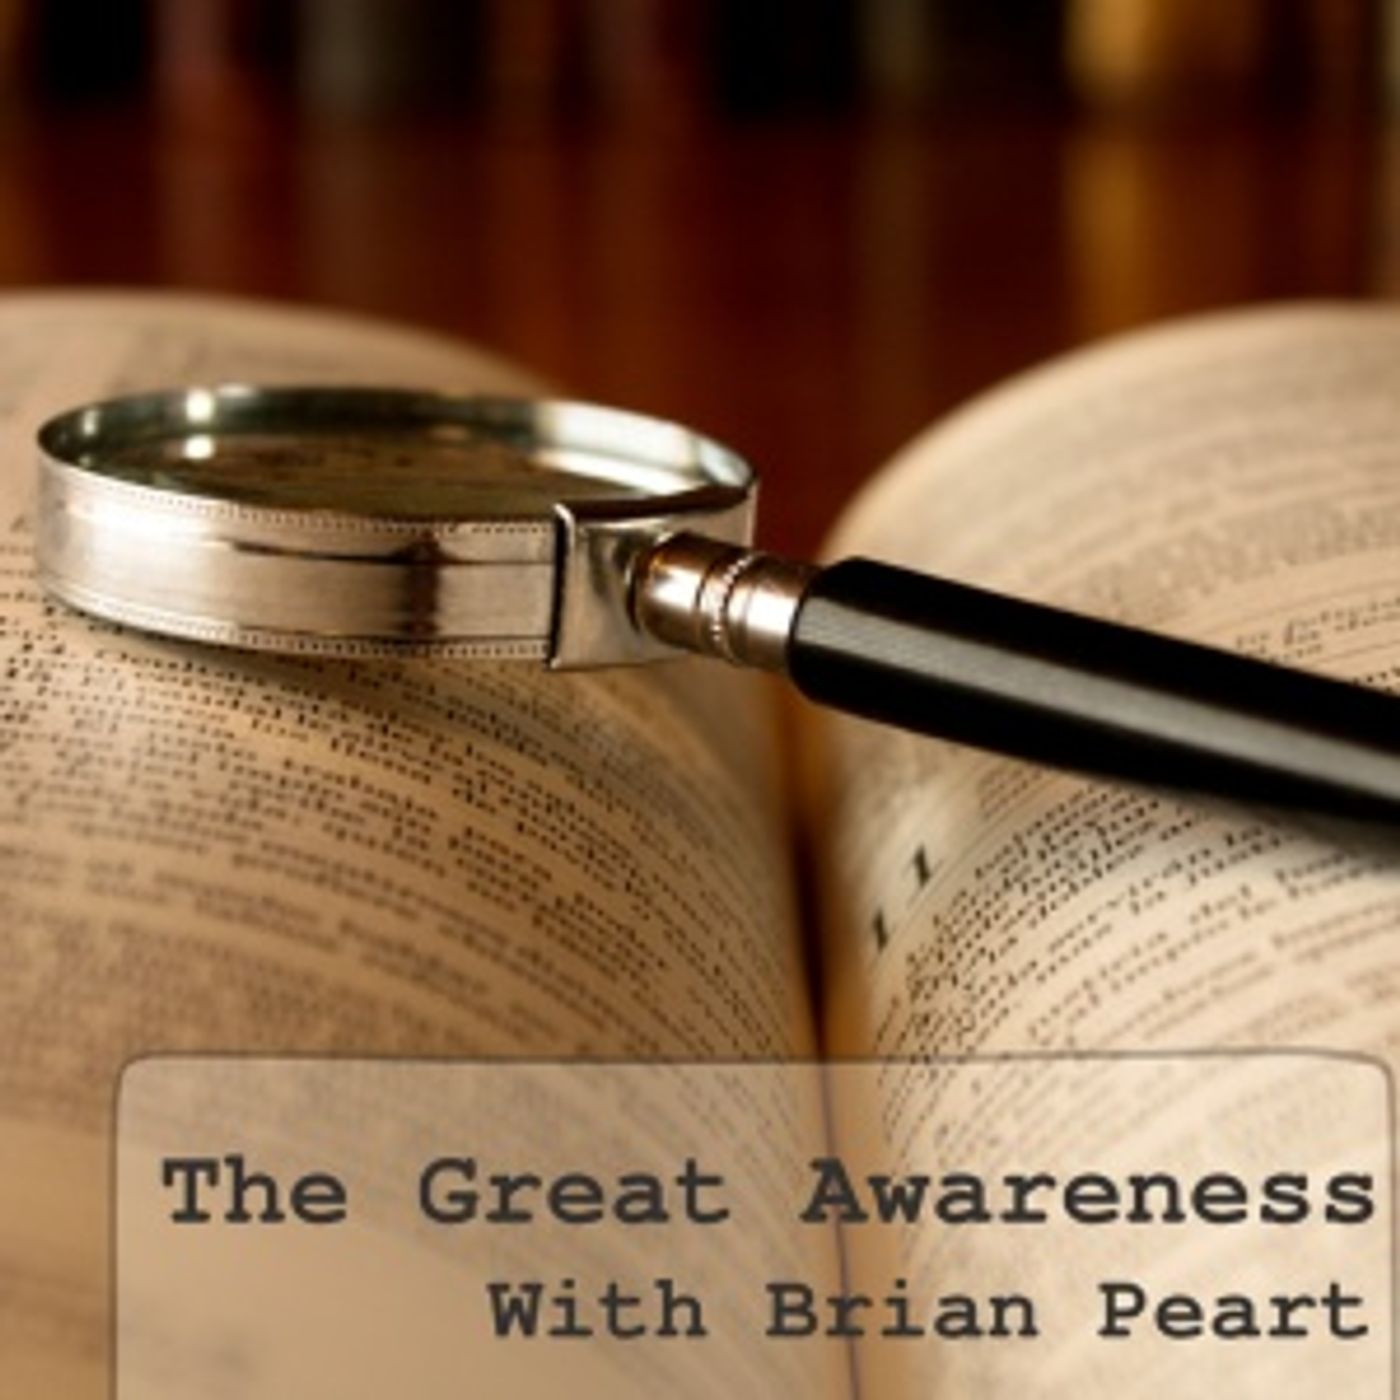 The Great Awareness, "The 5 Pillars of a GREAT Life" : Pillar 5 - GOOD WORKS - with Brian Peart